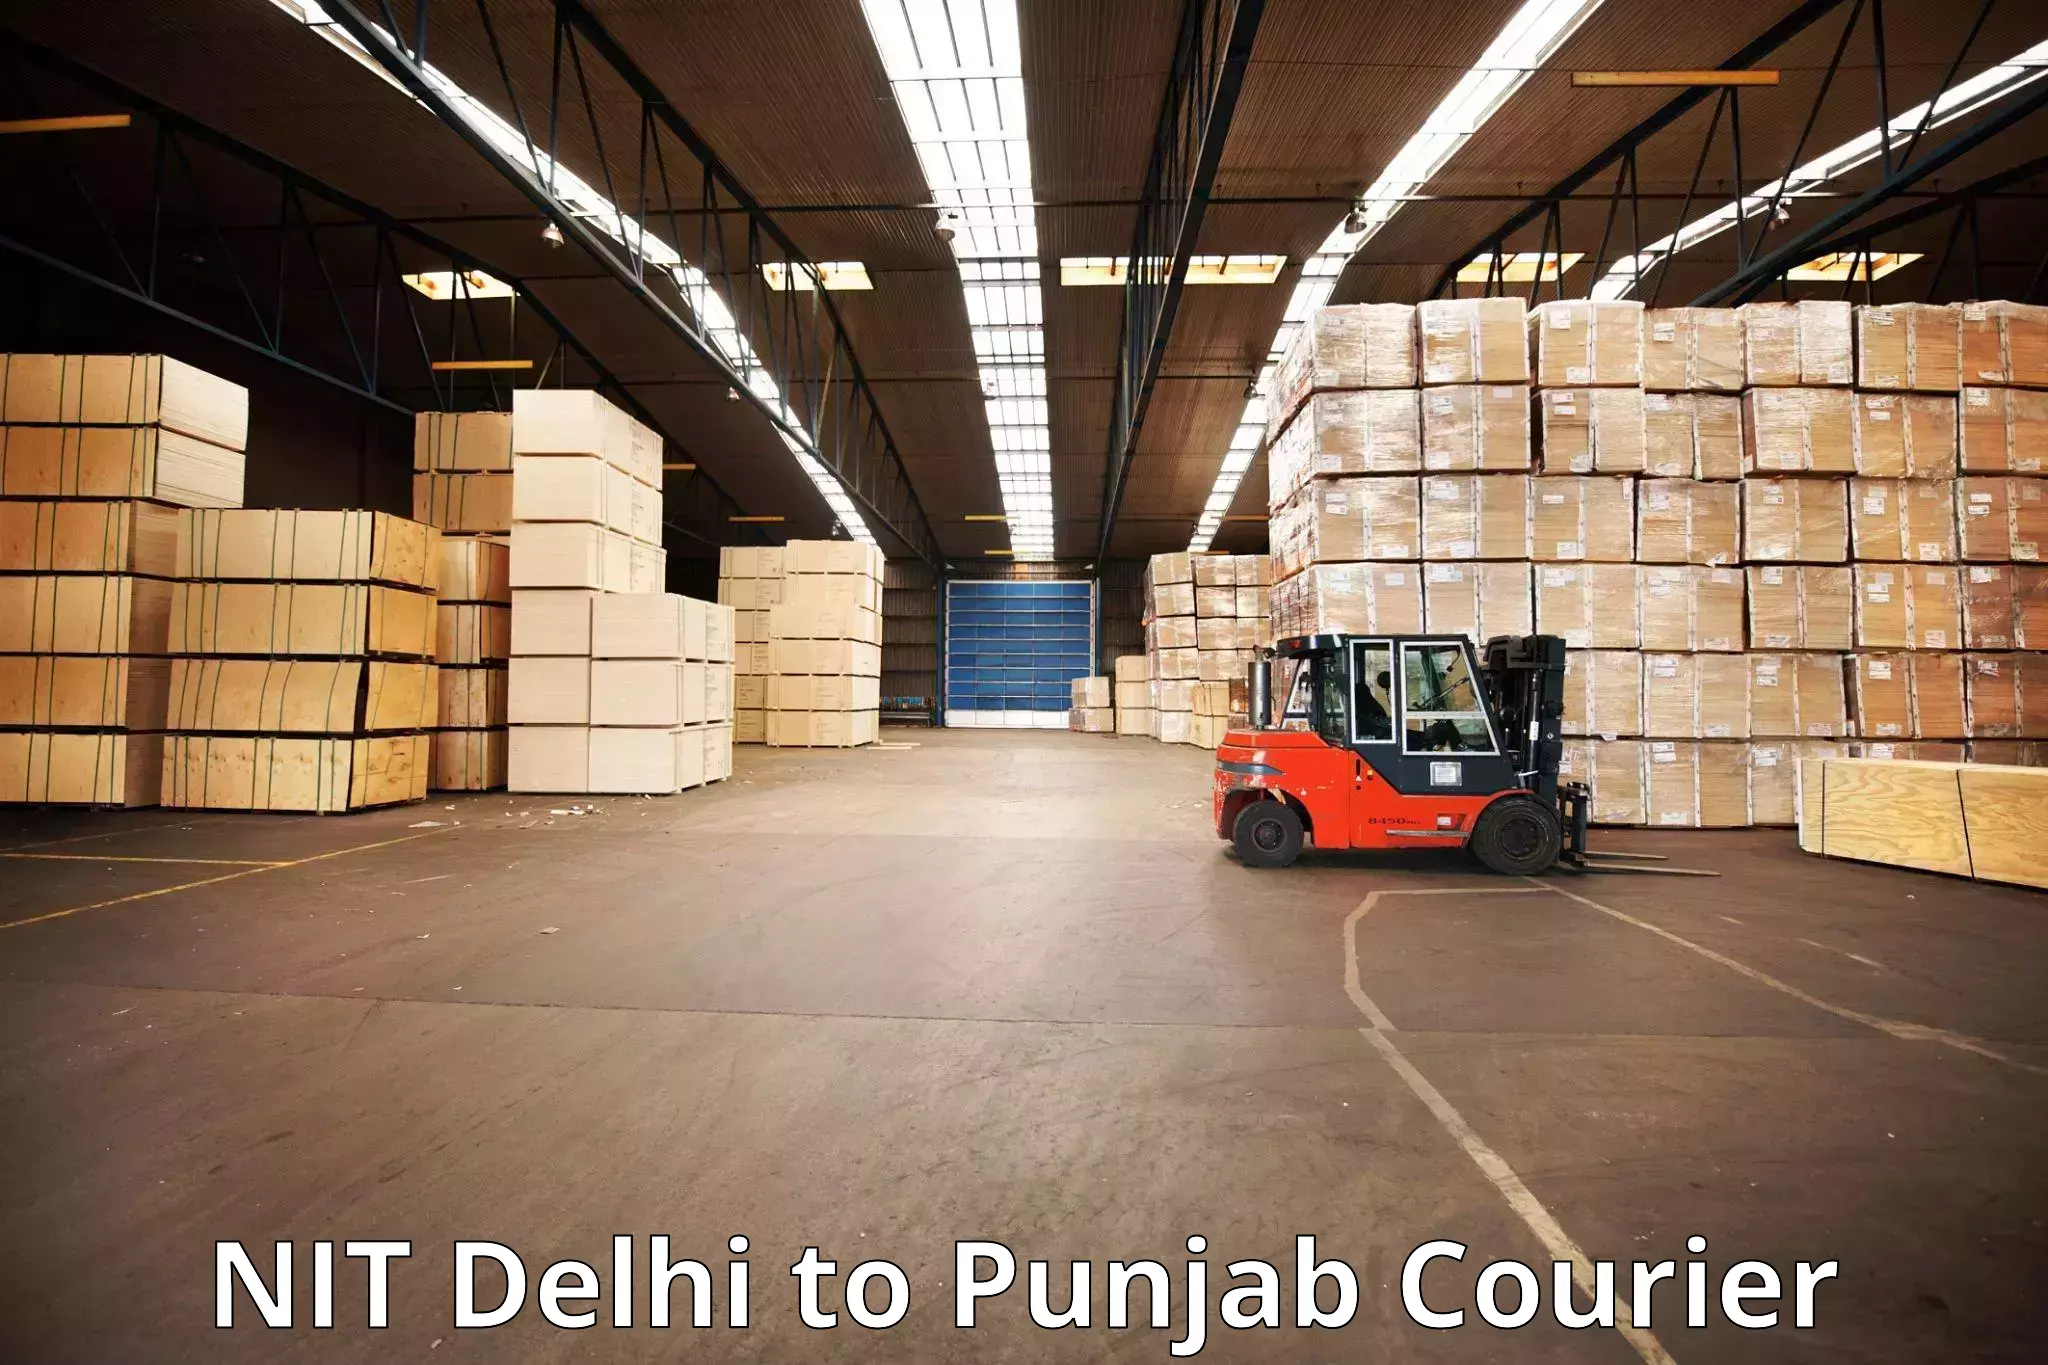 Personal effects shipping NIT Delhi to Punjab